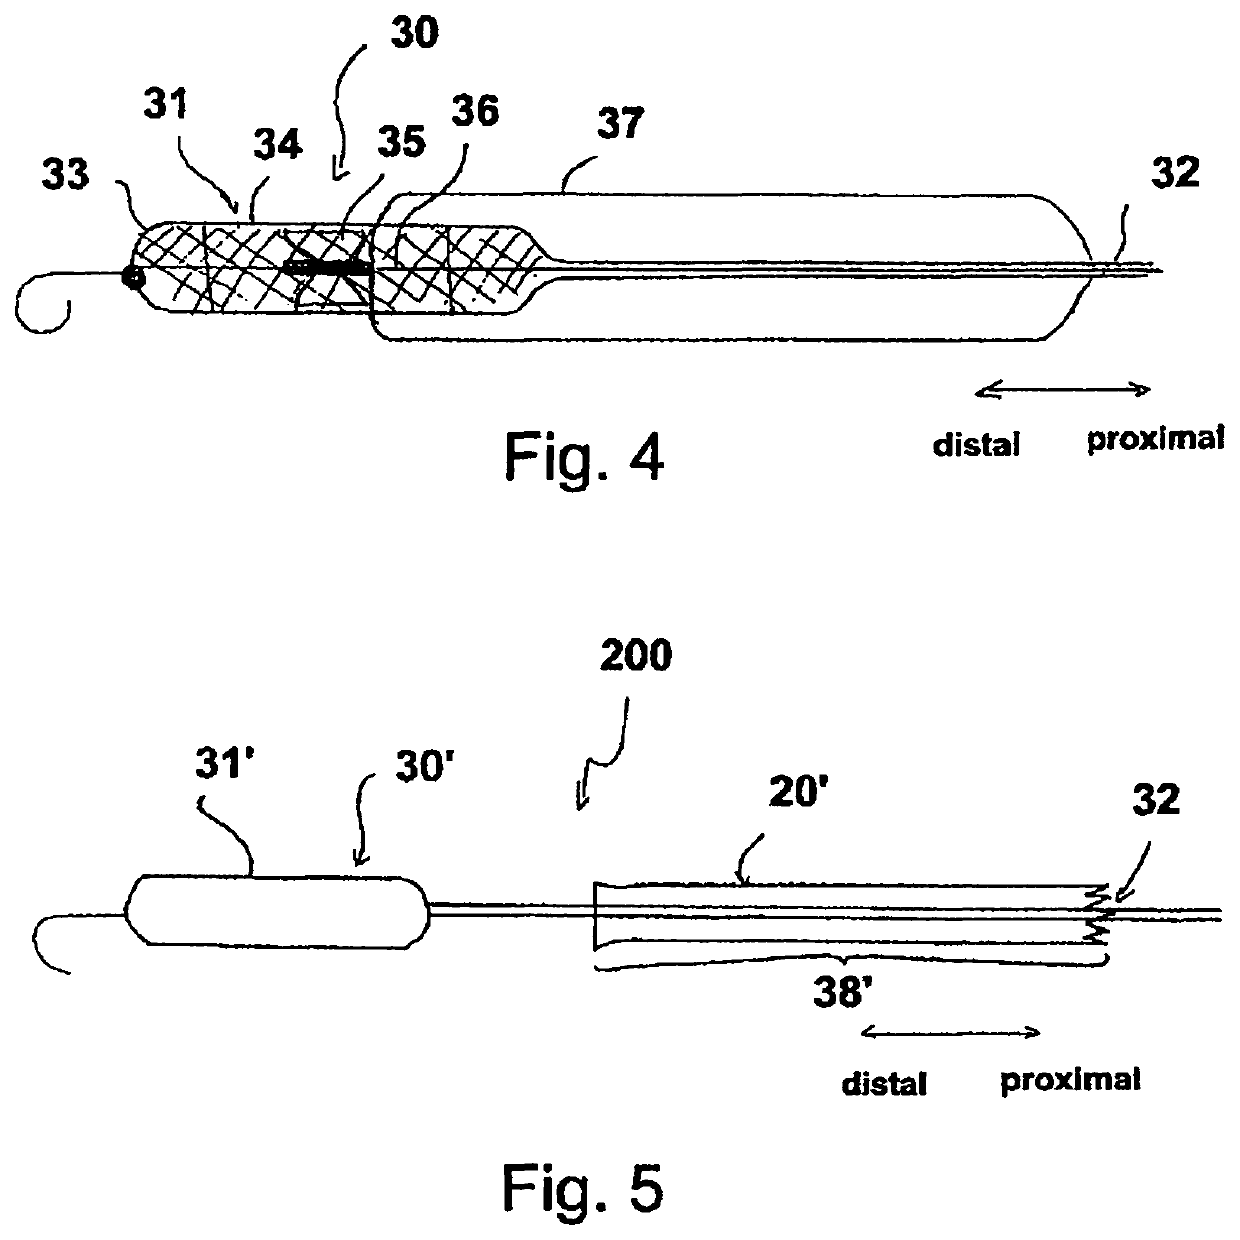 Sheath device for inserting a catheter